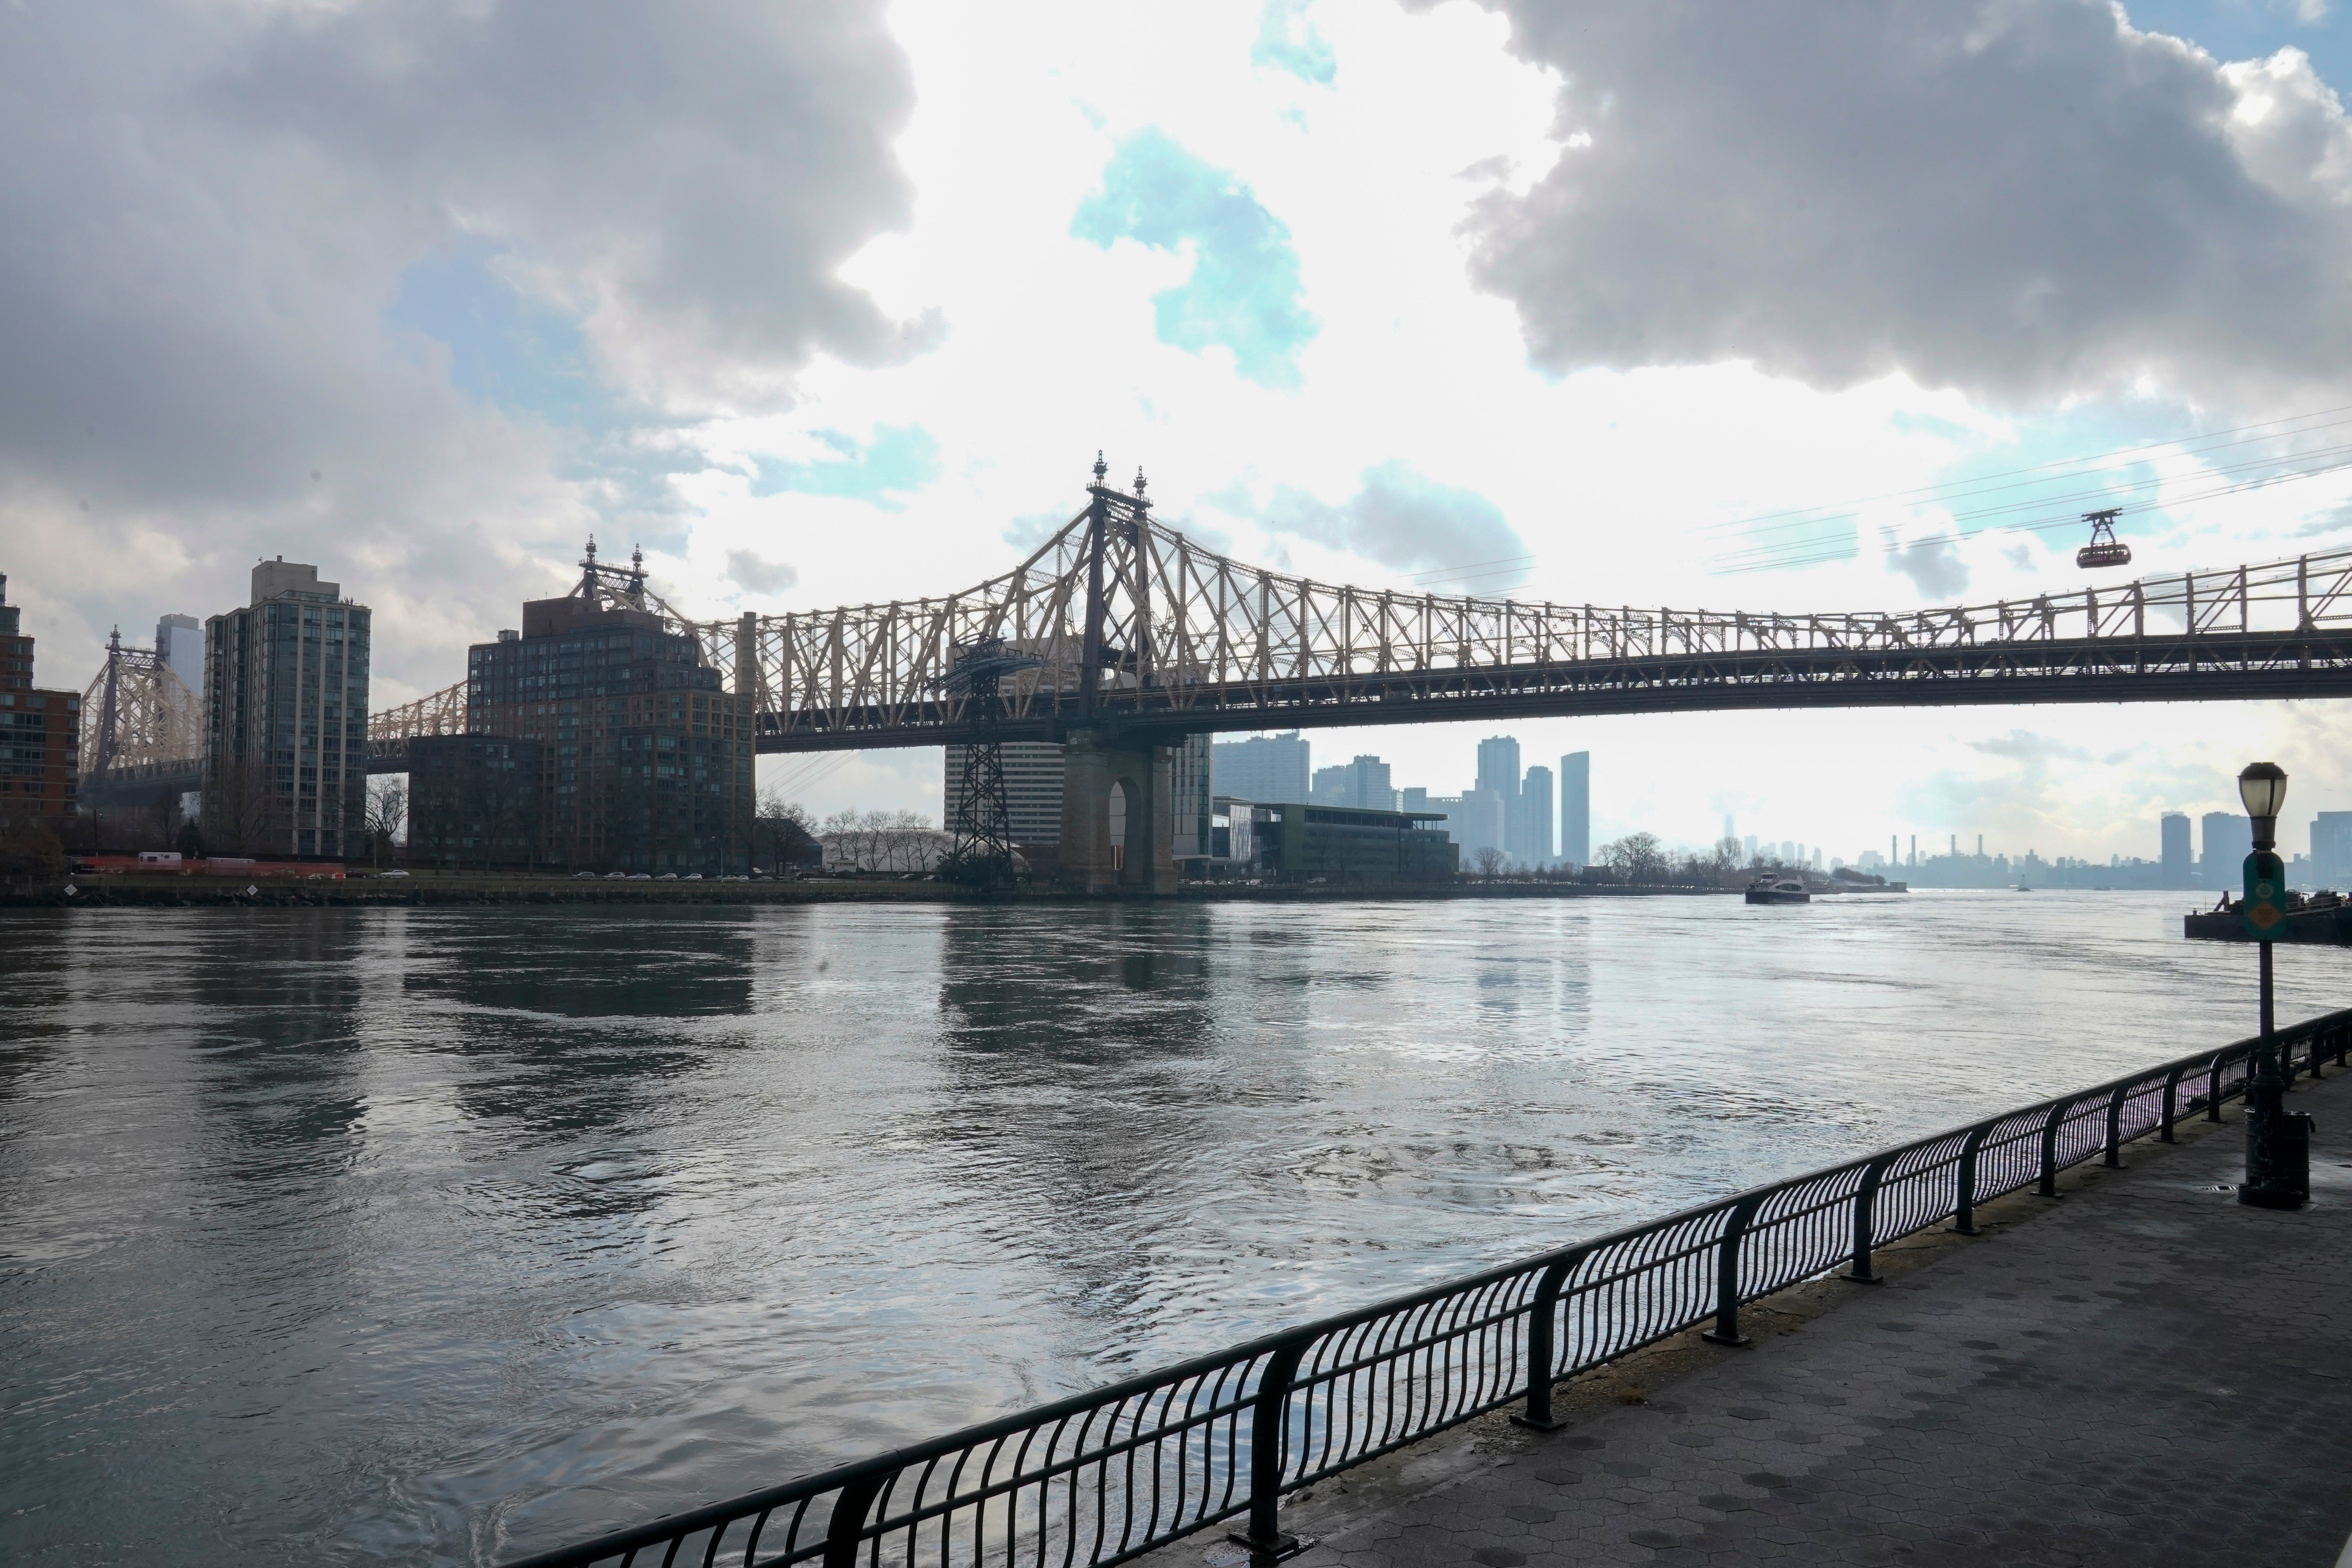 The East River, where Mr Godfrey jumped in and went missing, is over 16 miles long